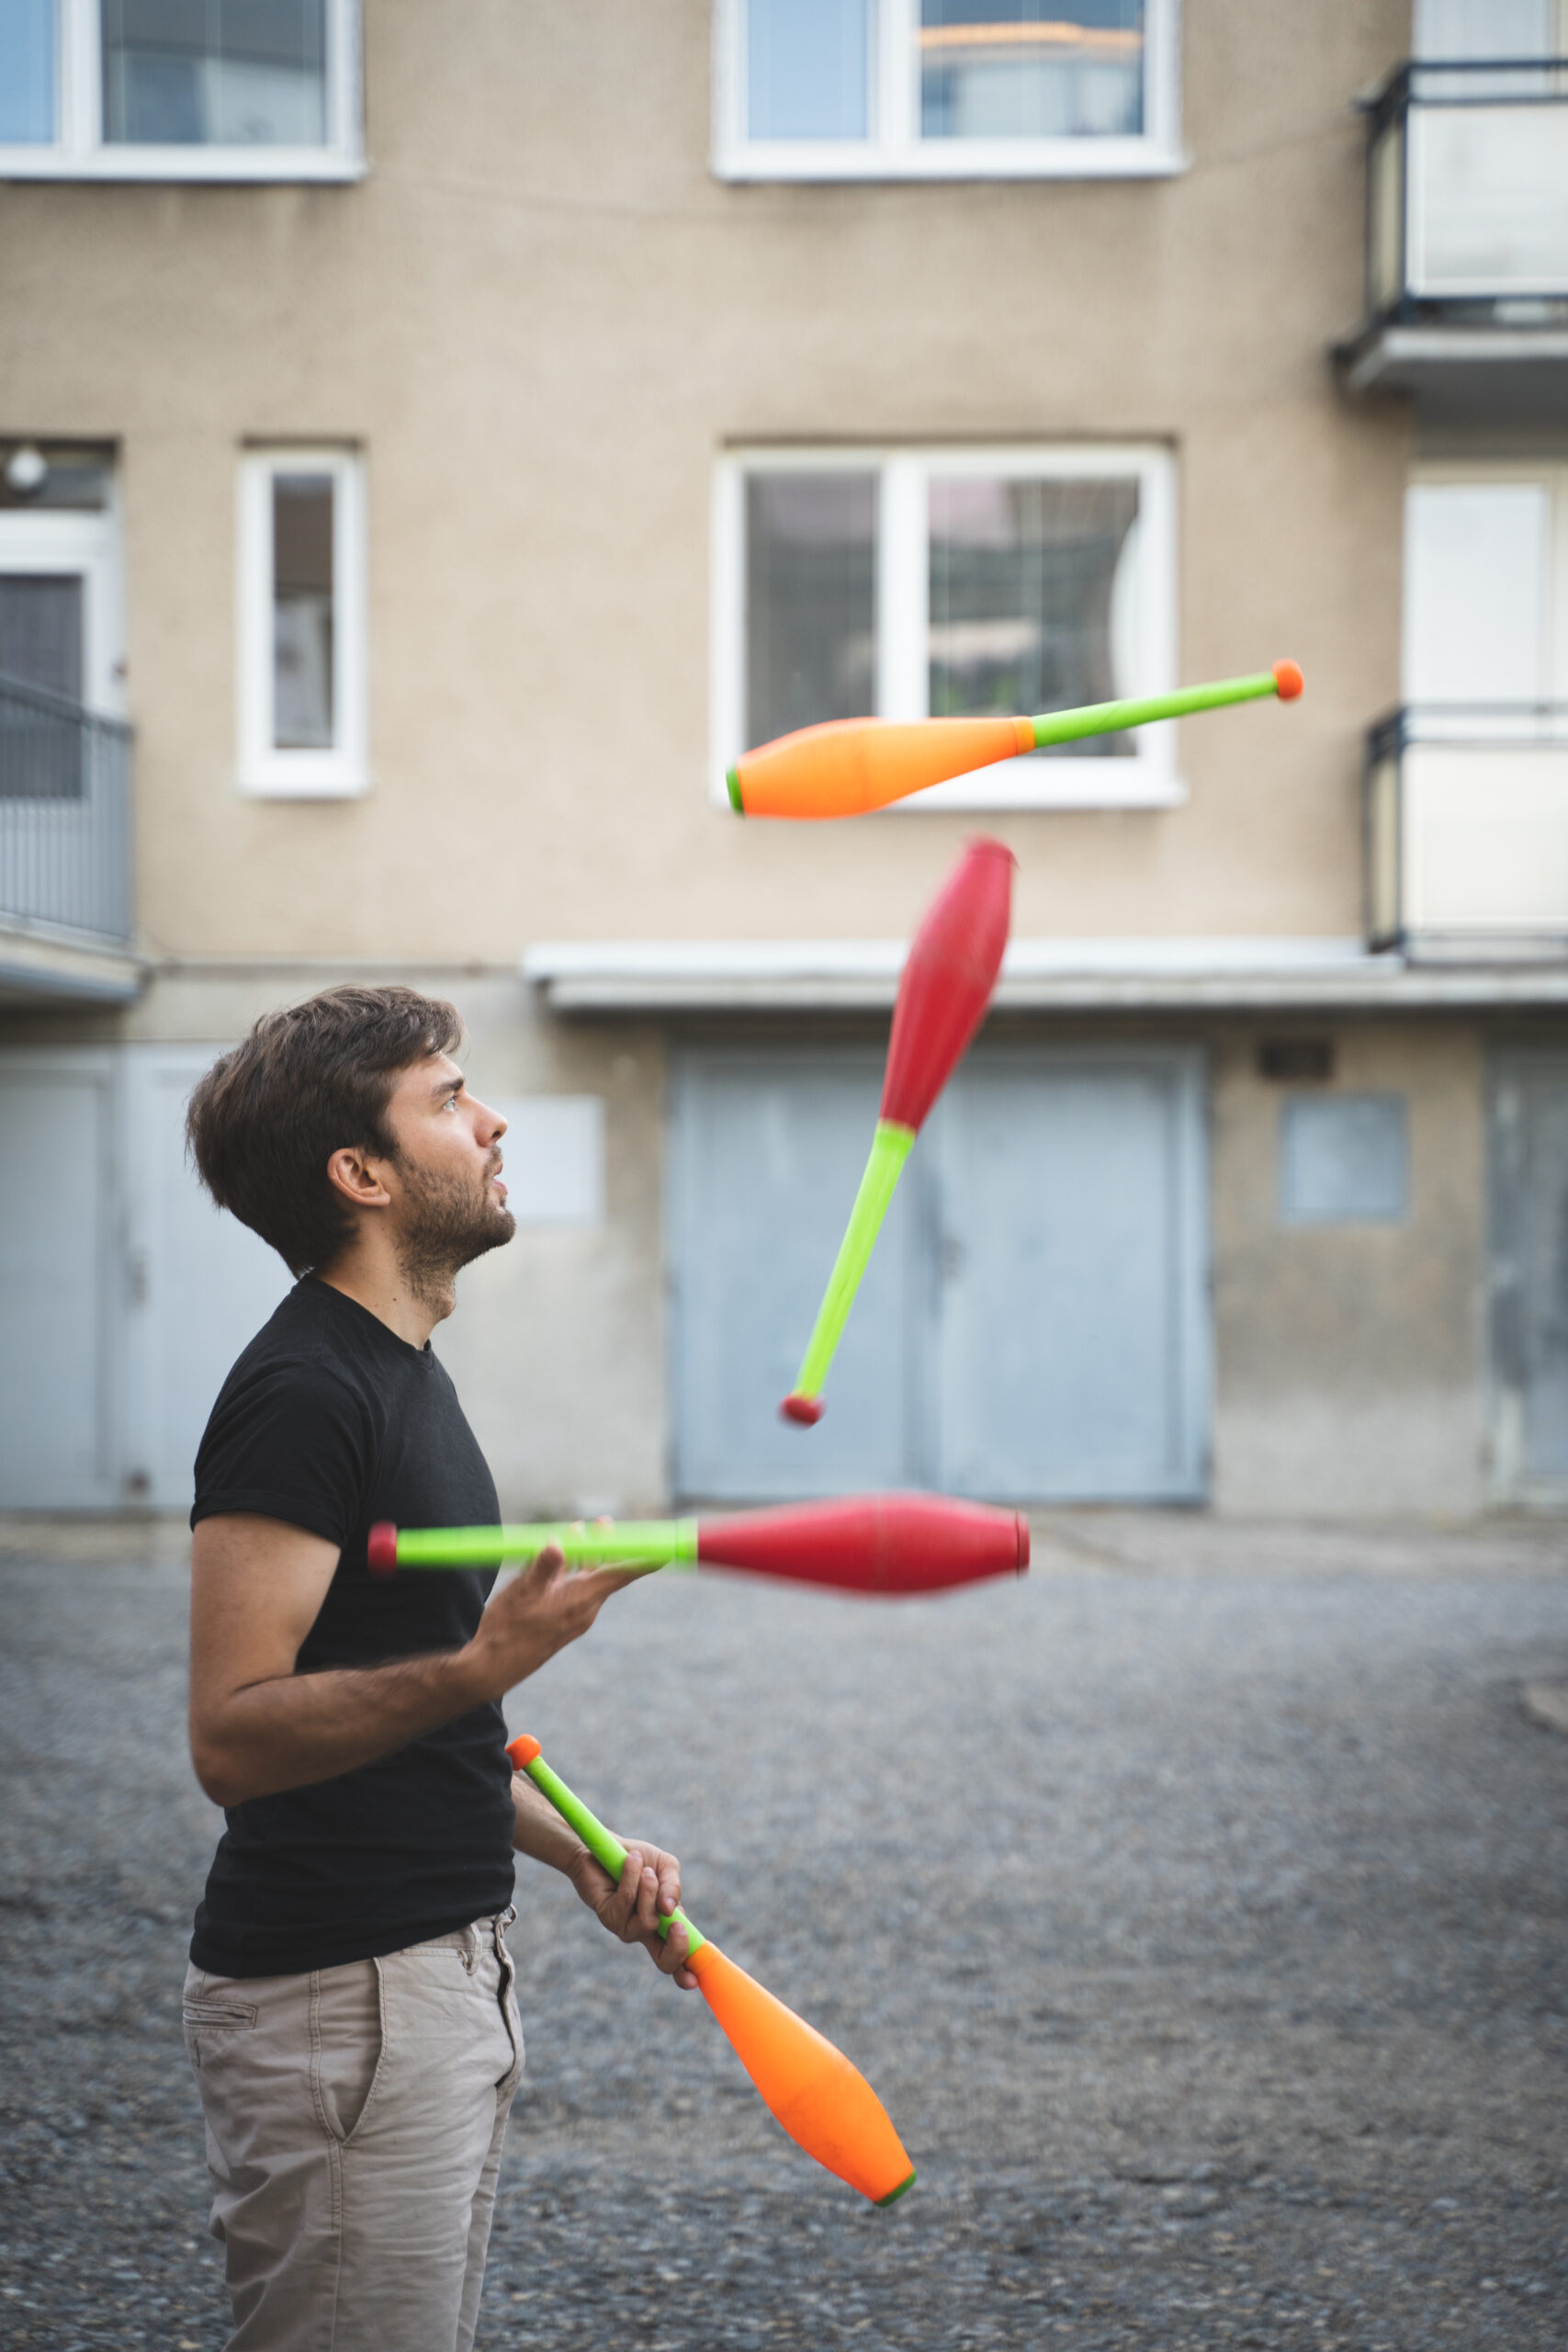 Juggling: Toss juggling, The most popular form of the recreational artistic activity. 1710x2560 HD Background.